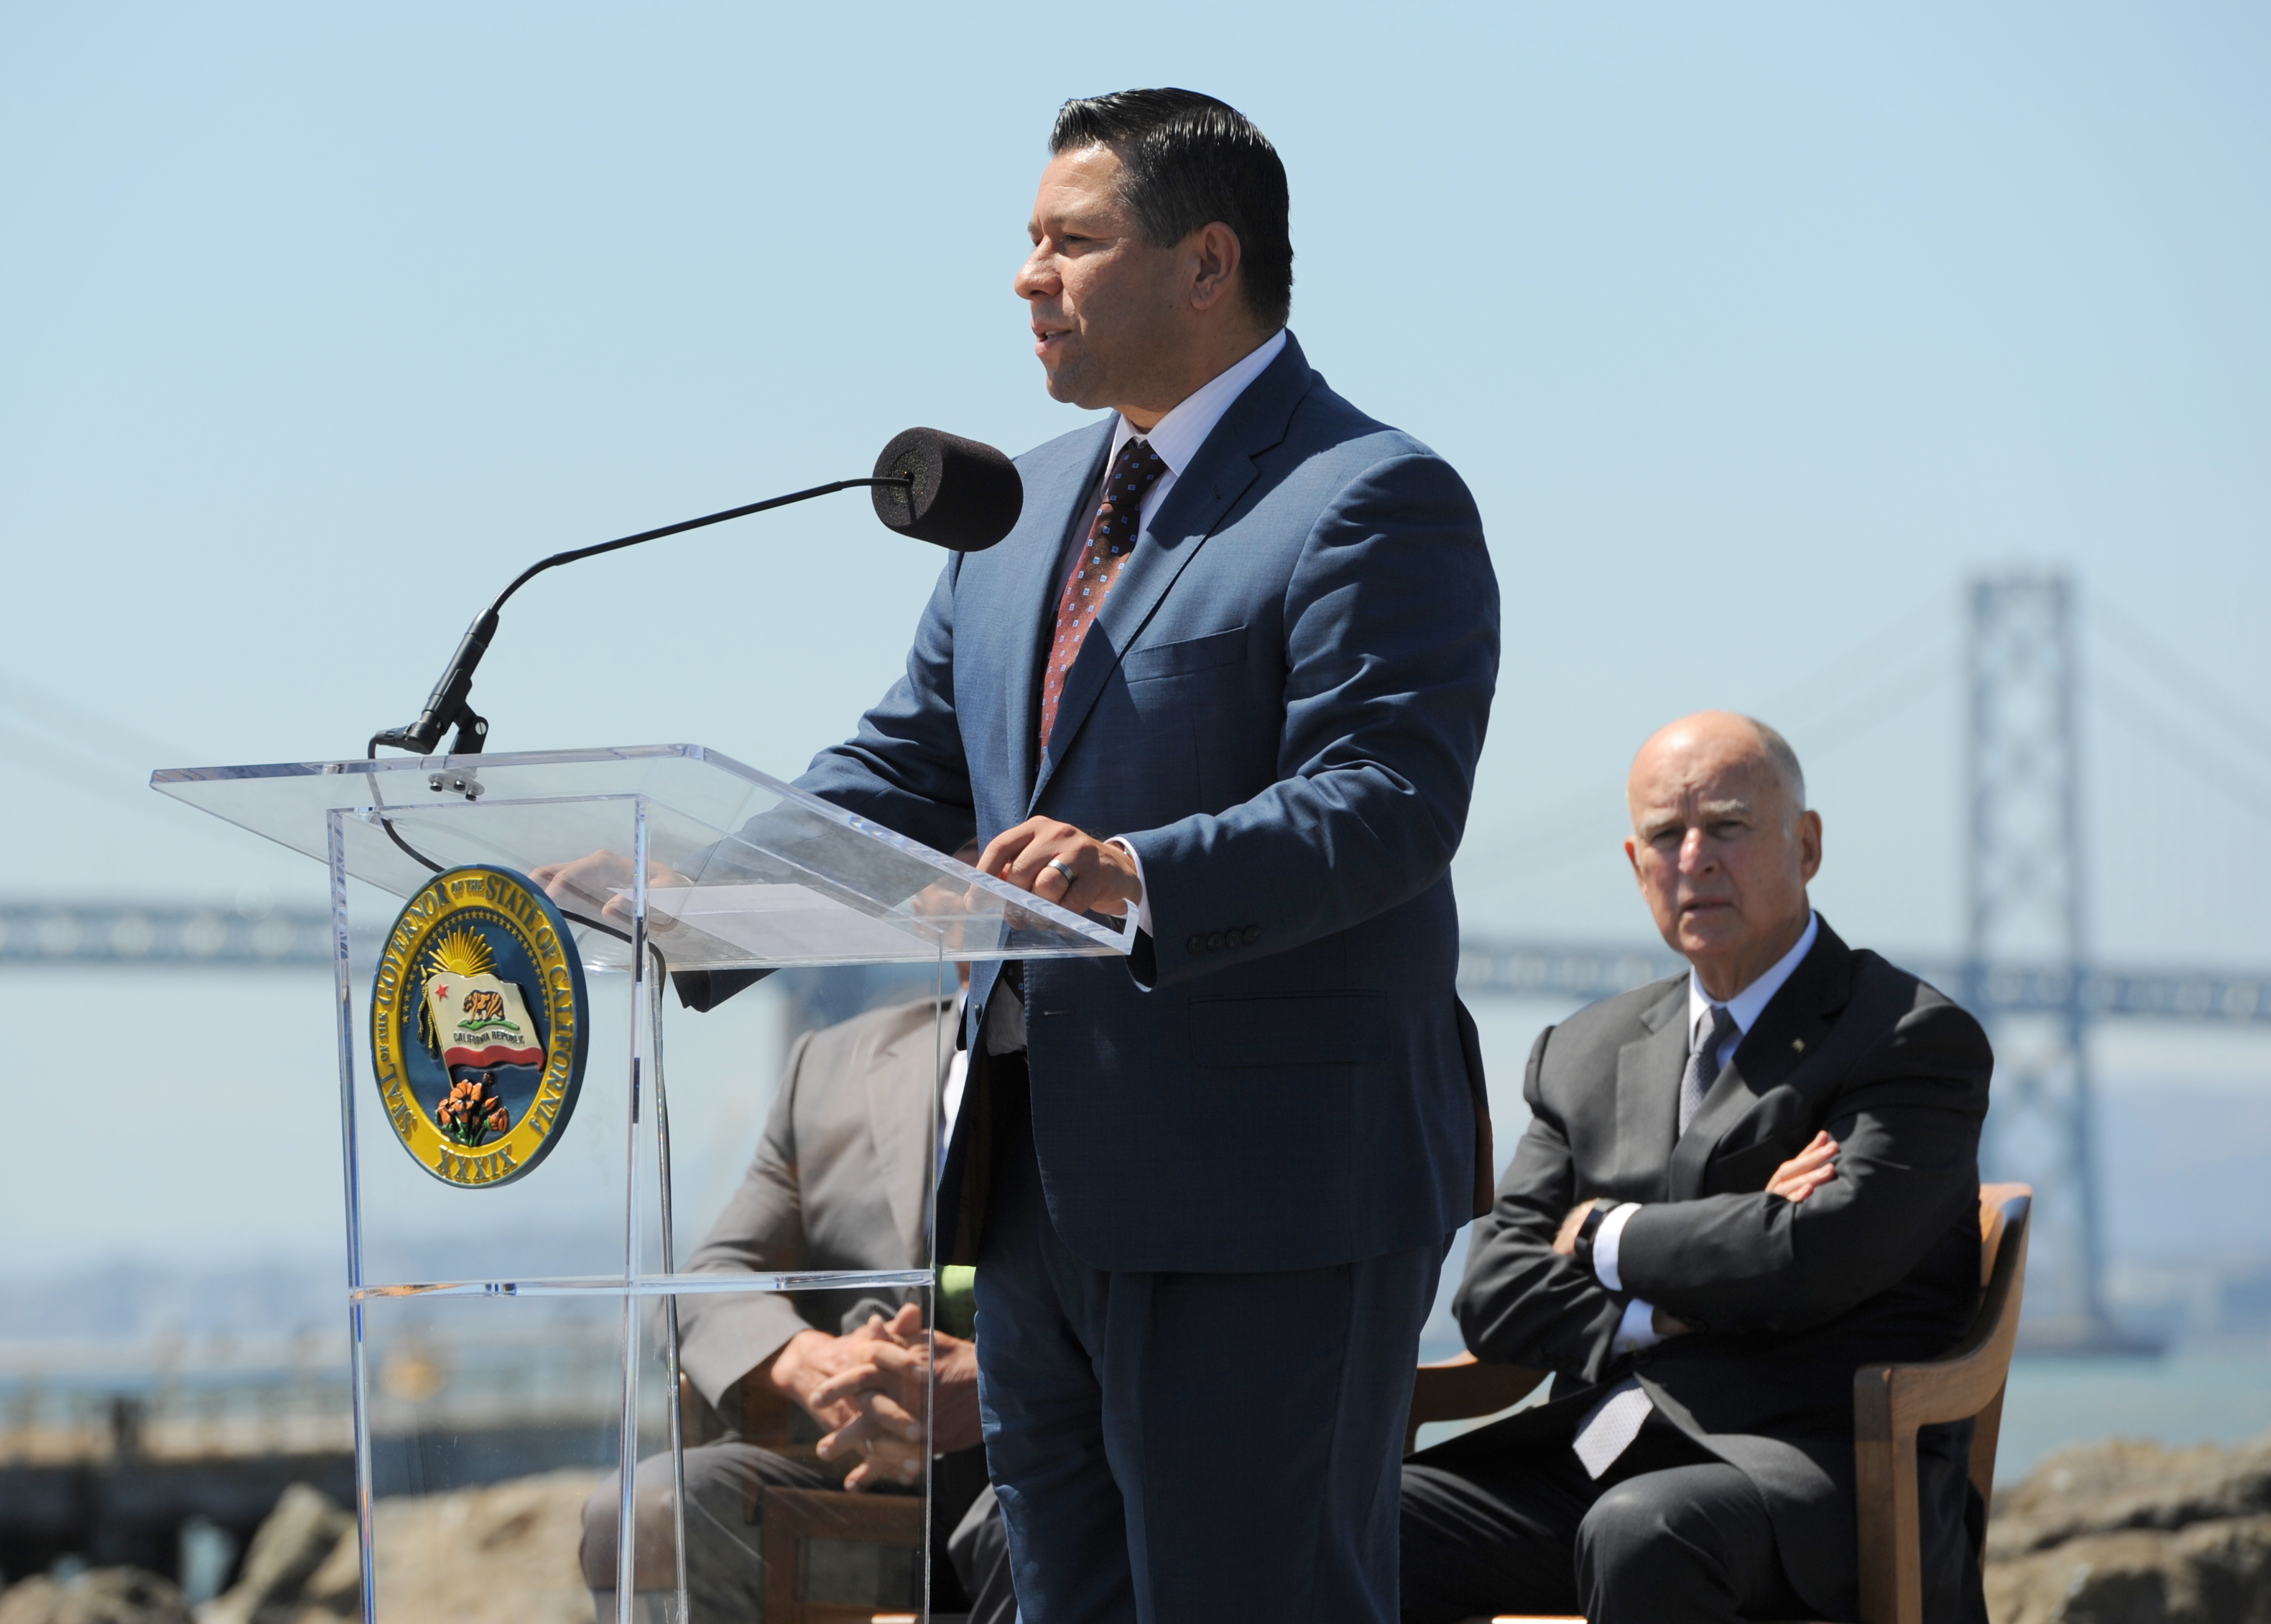 Assemblymember Eduardo Garcia and Governor Brown at signing of groundbreaking climate change legislation